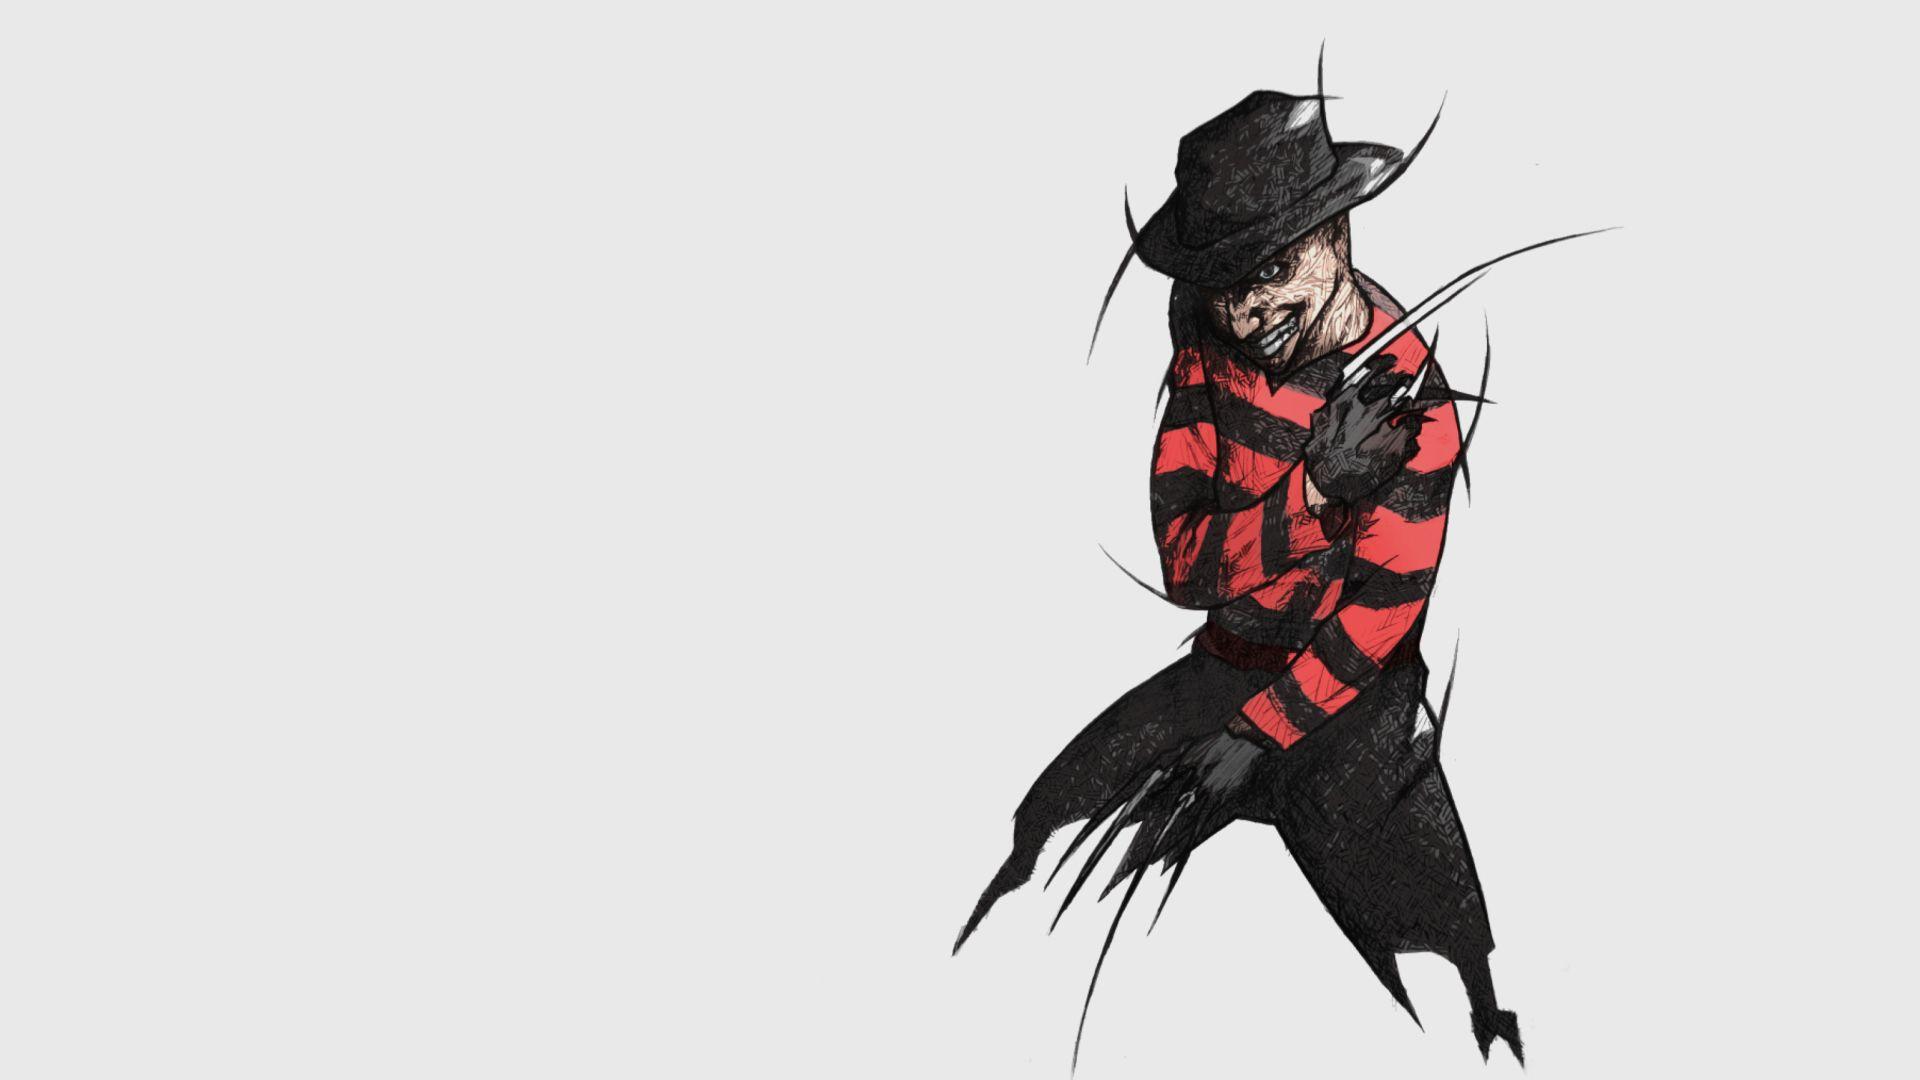 Krueger Wallpaper, High Quality Picture for PC & Mac, Tablet